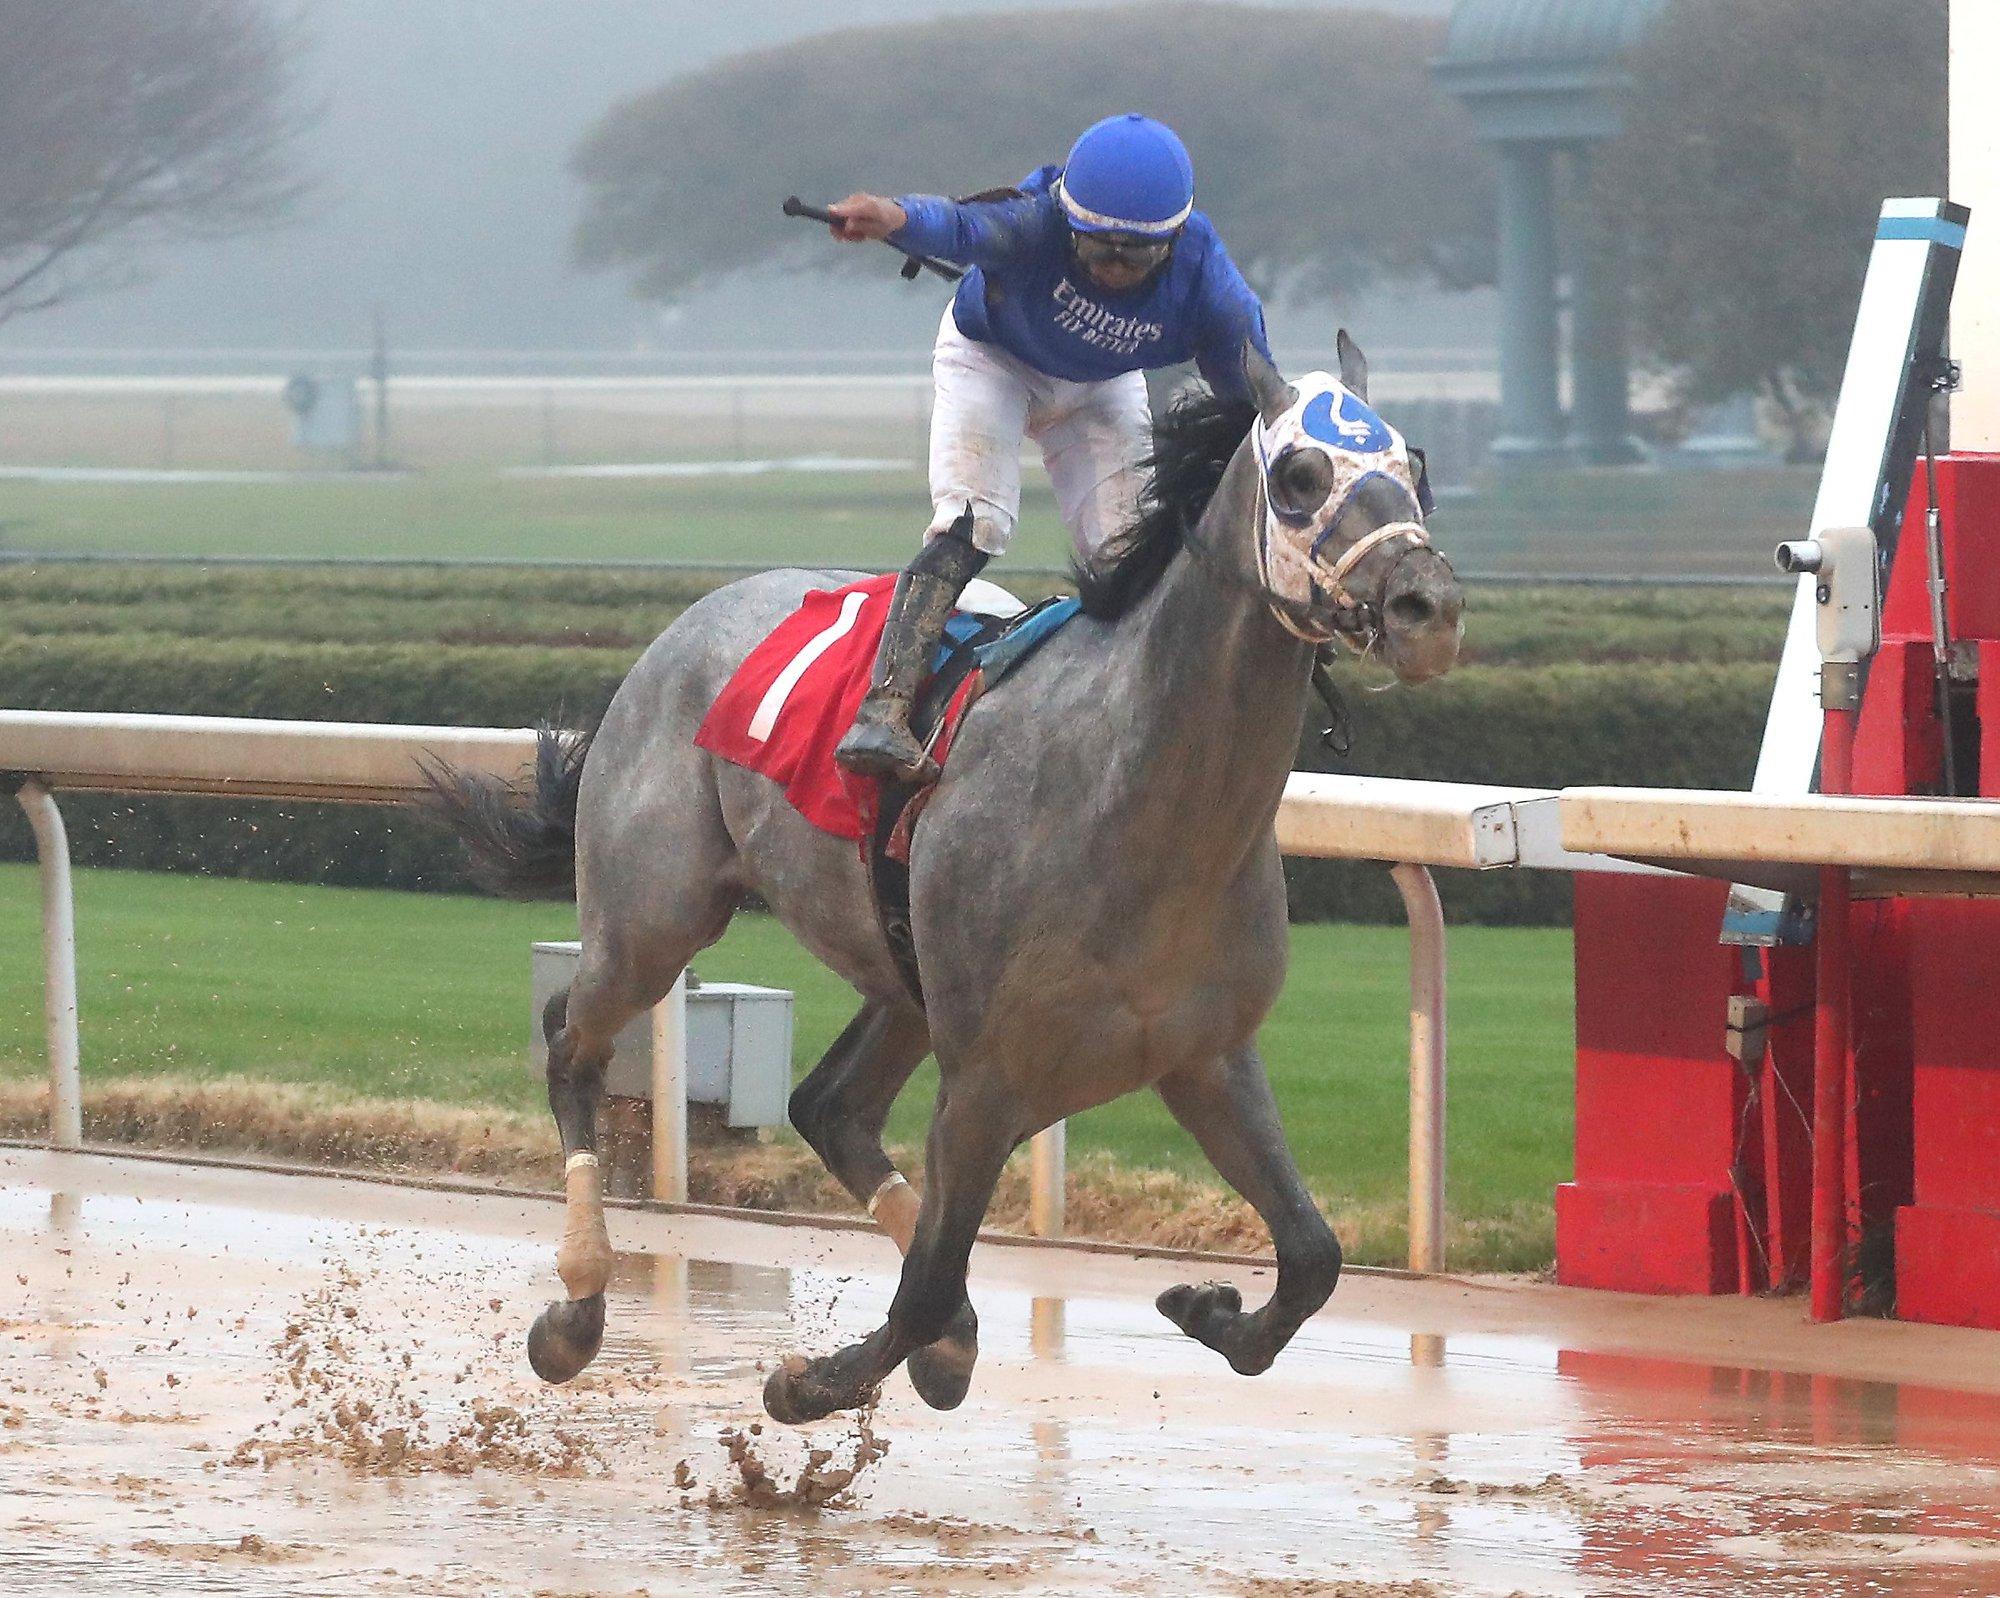 Essential Quality romps in the Southwest Stakes at Oaklawn Park before running a game 4th in the 2021 Kentucky Derby